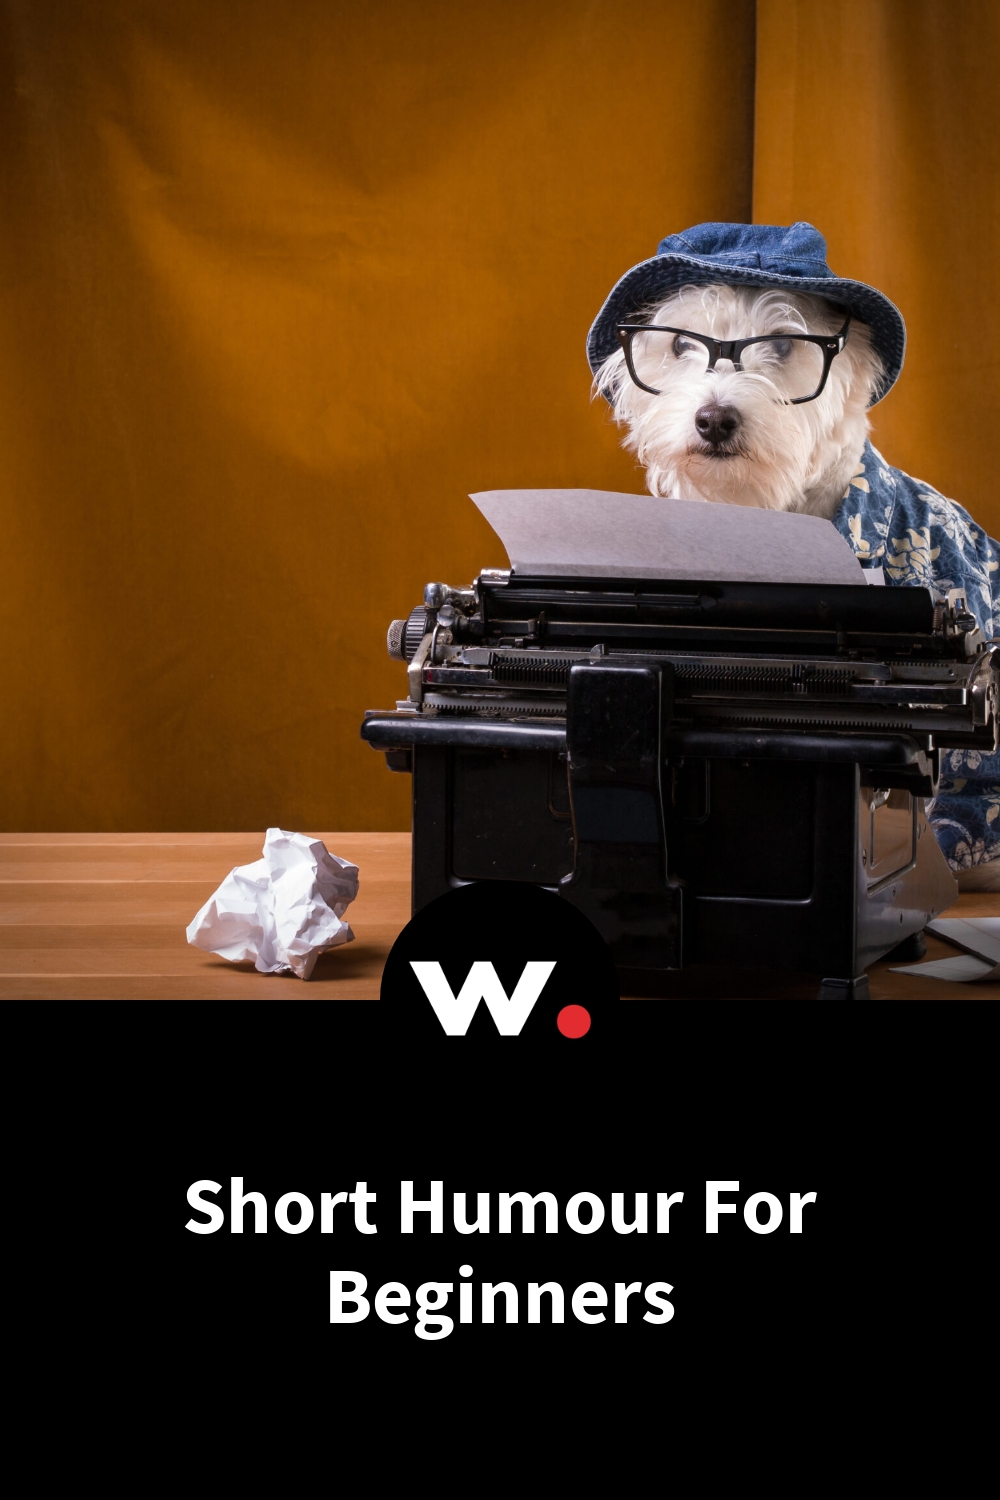 Short Humour For Beginners